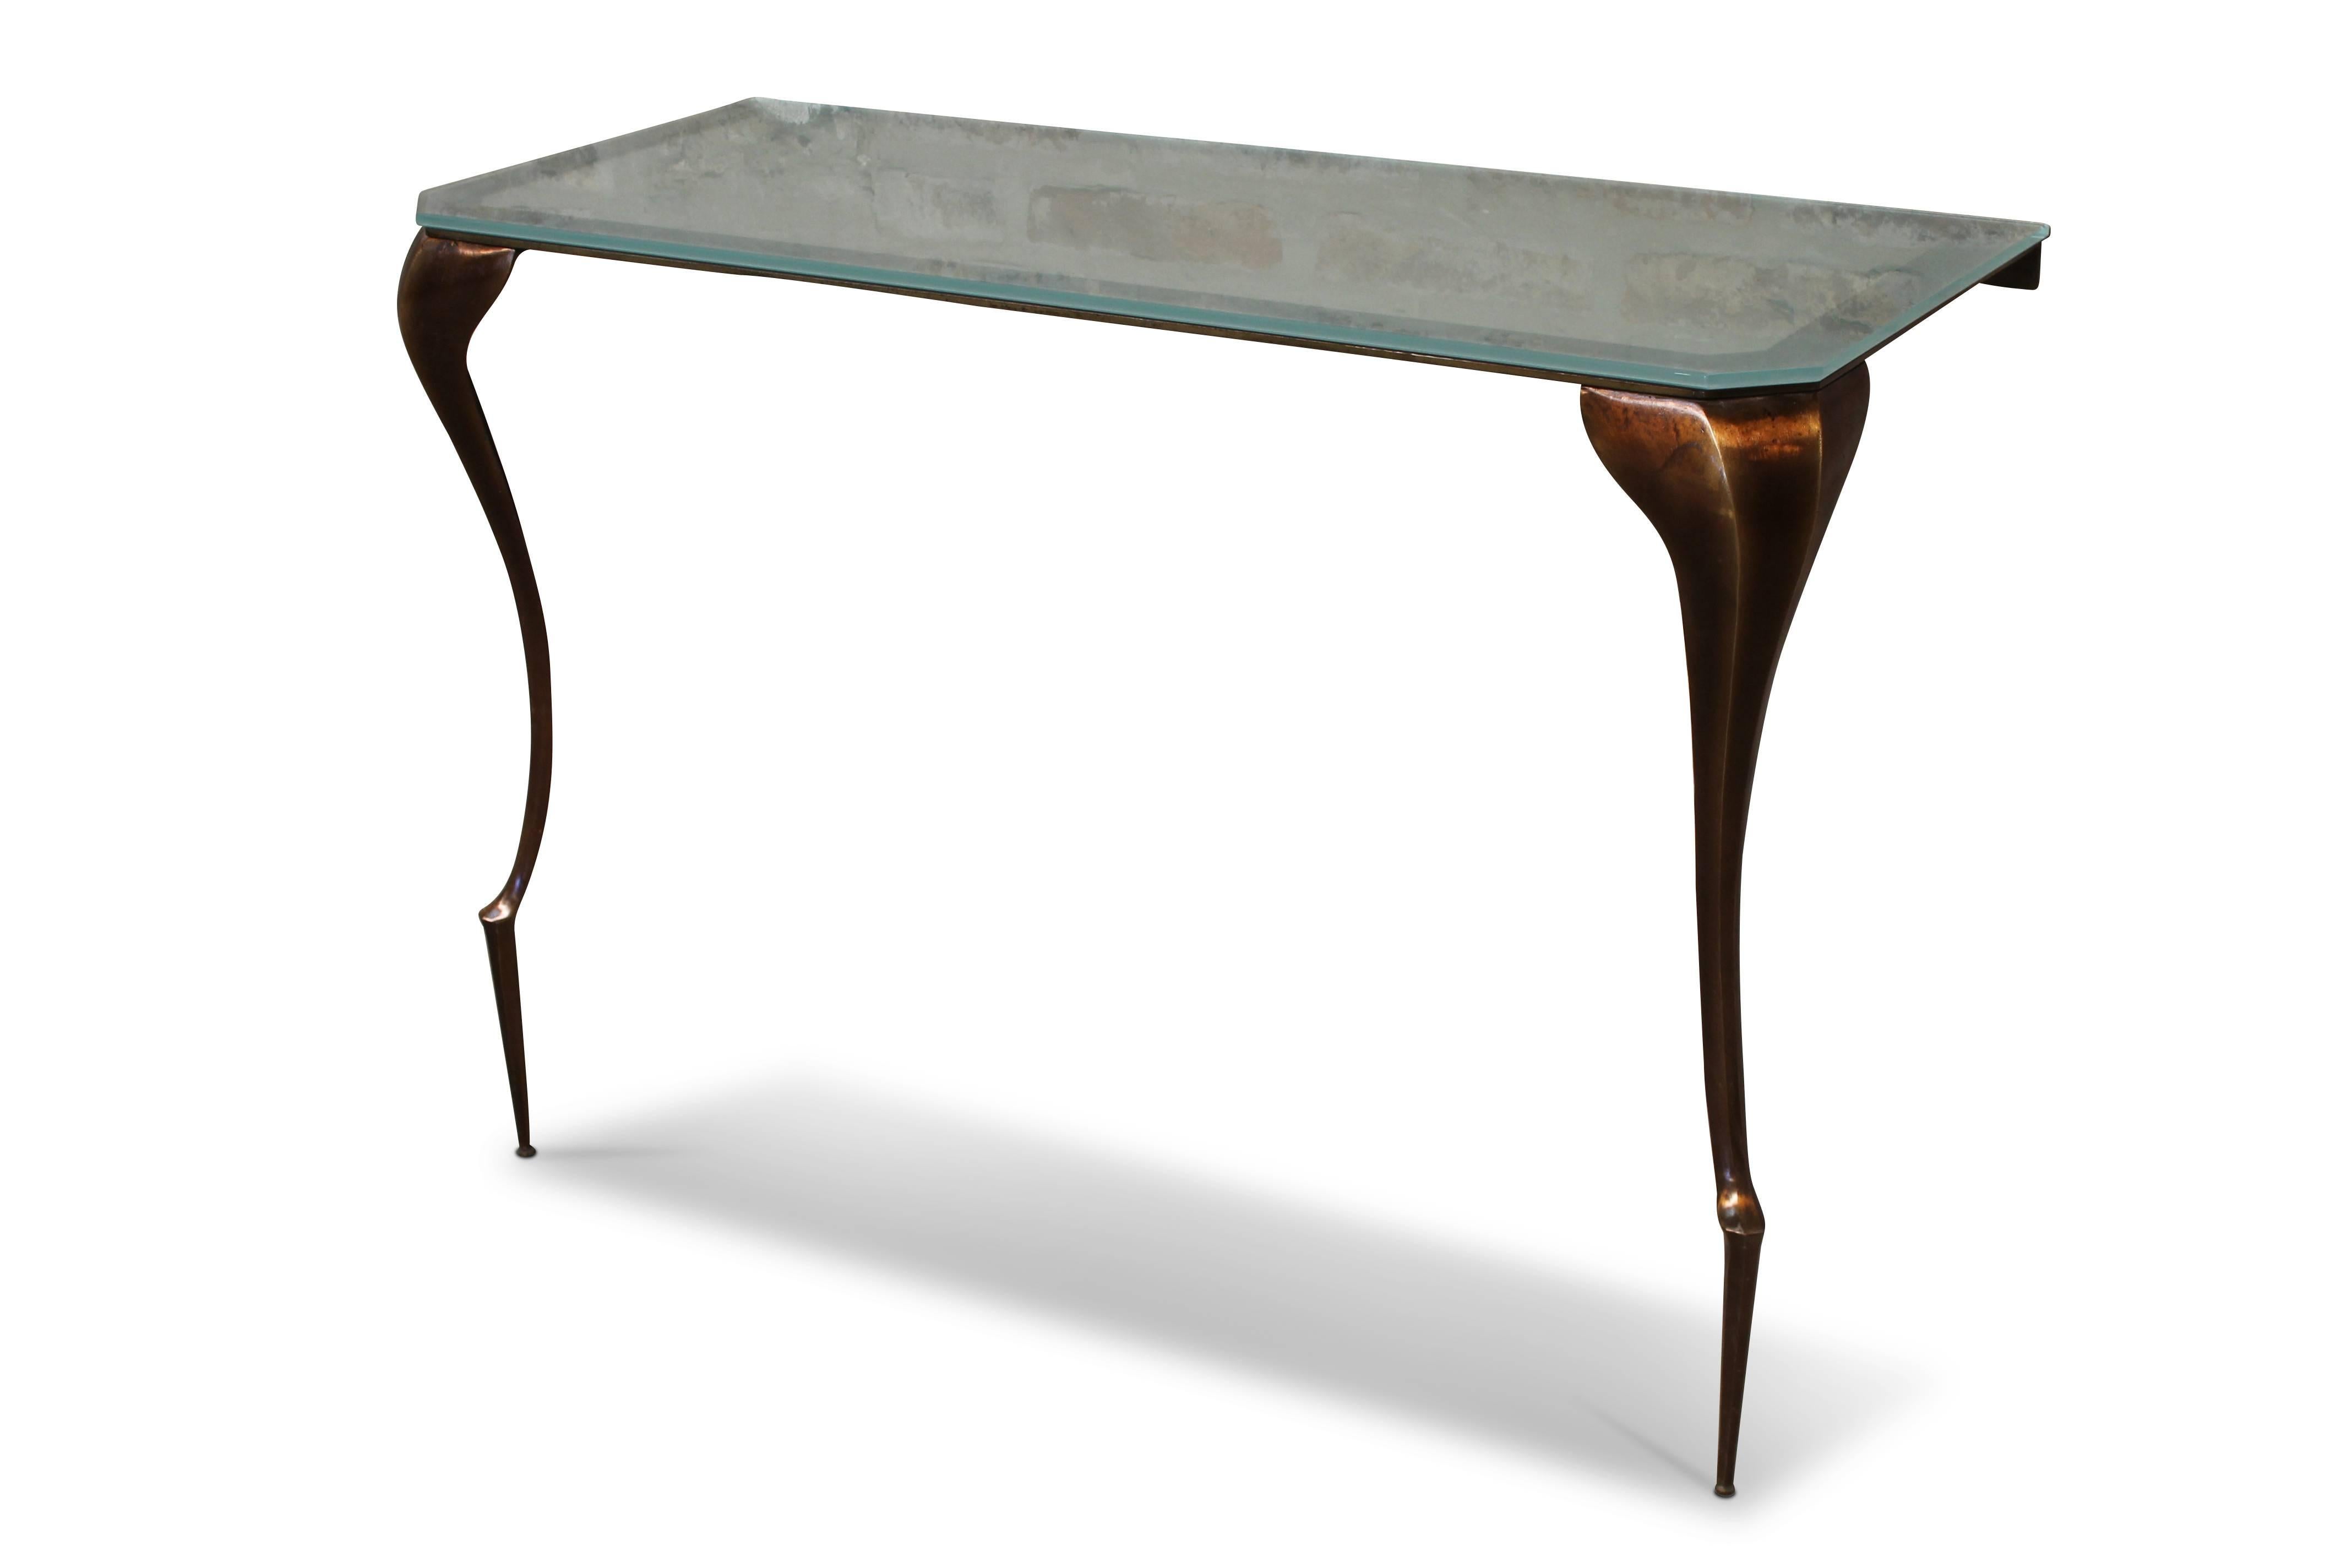 Lychorinda Modern Cast Bronze Console Table from Costantini

Measurements are 48